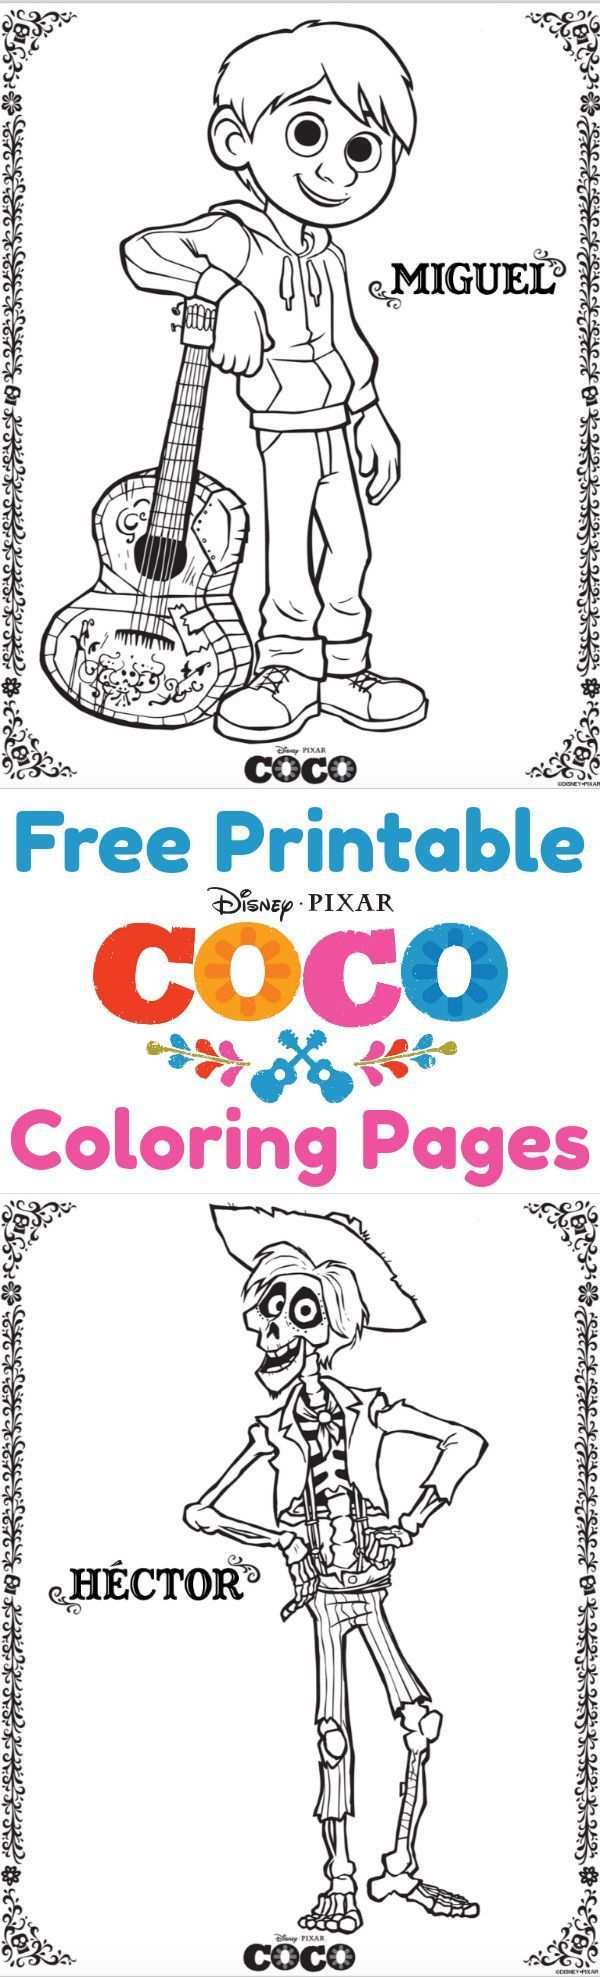 Download Free Coco Coloring Pages And Activity Pages And Your Kids Color Their Favori